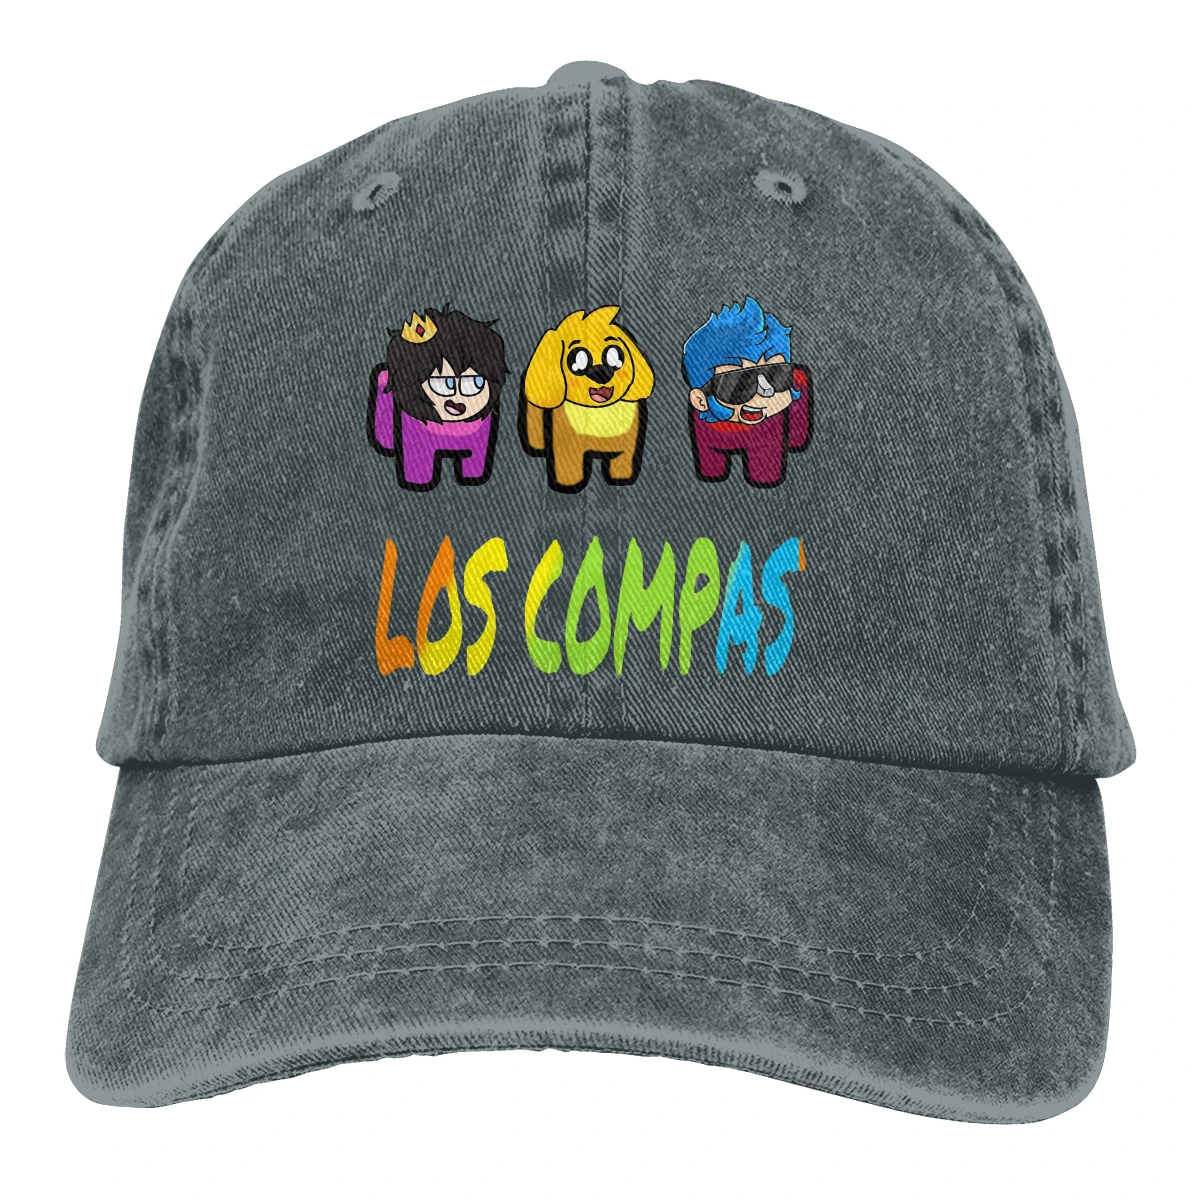 Adjustable Solid Color Baseball Cap Among Compas Washed Cotton Compadretes mikecrack minecra Games Sports Woman Hat